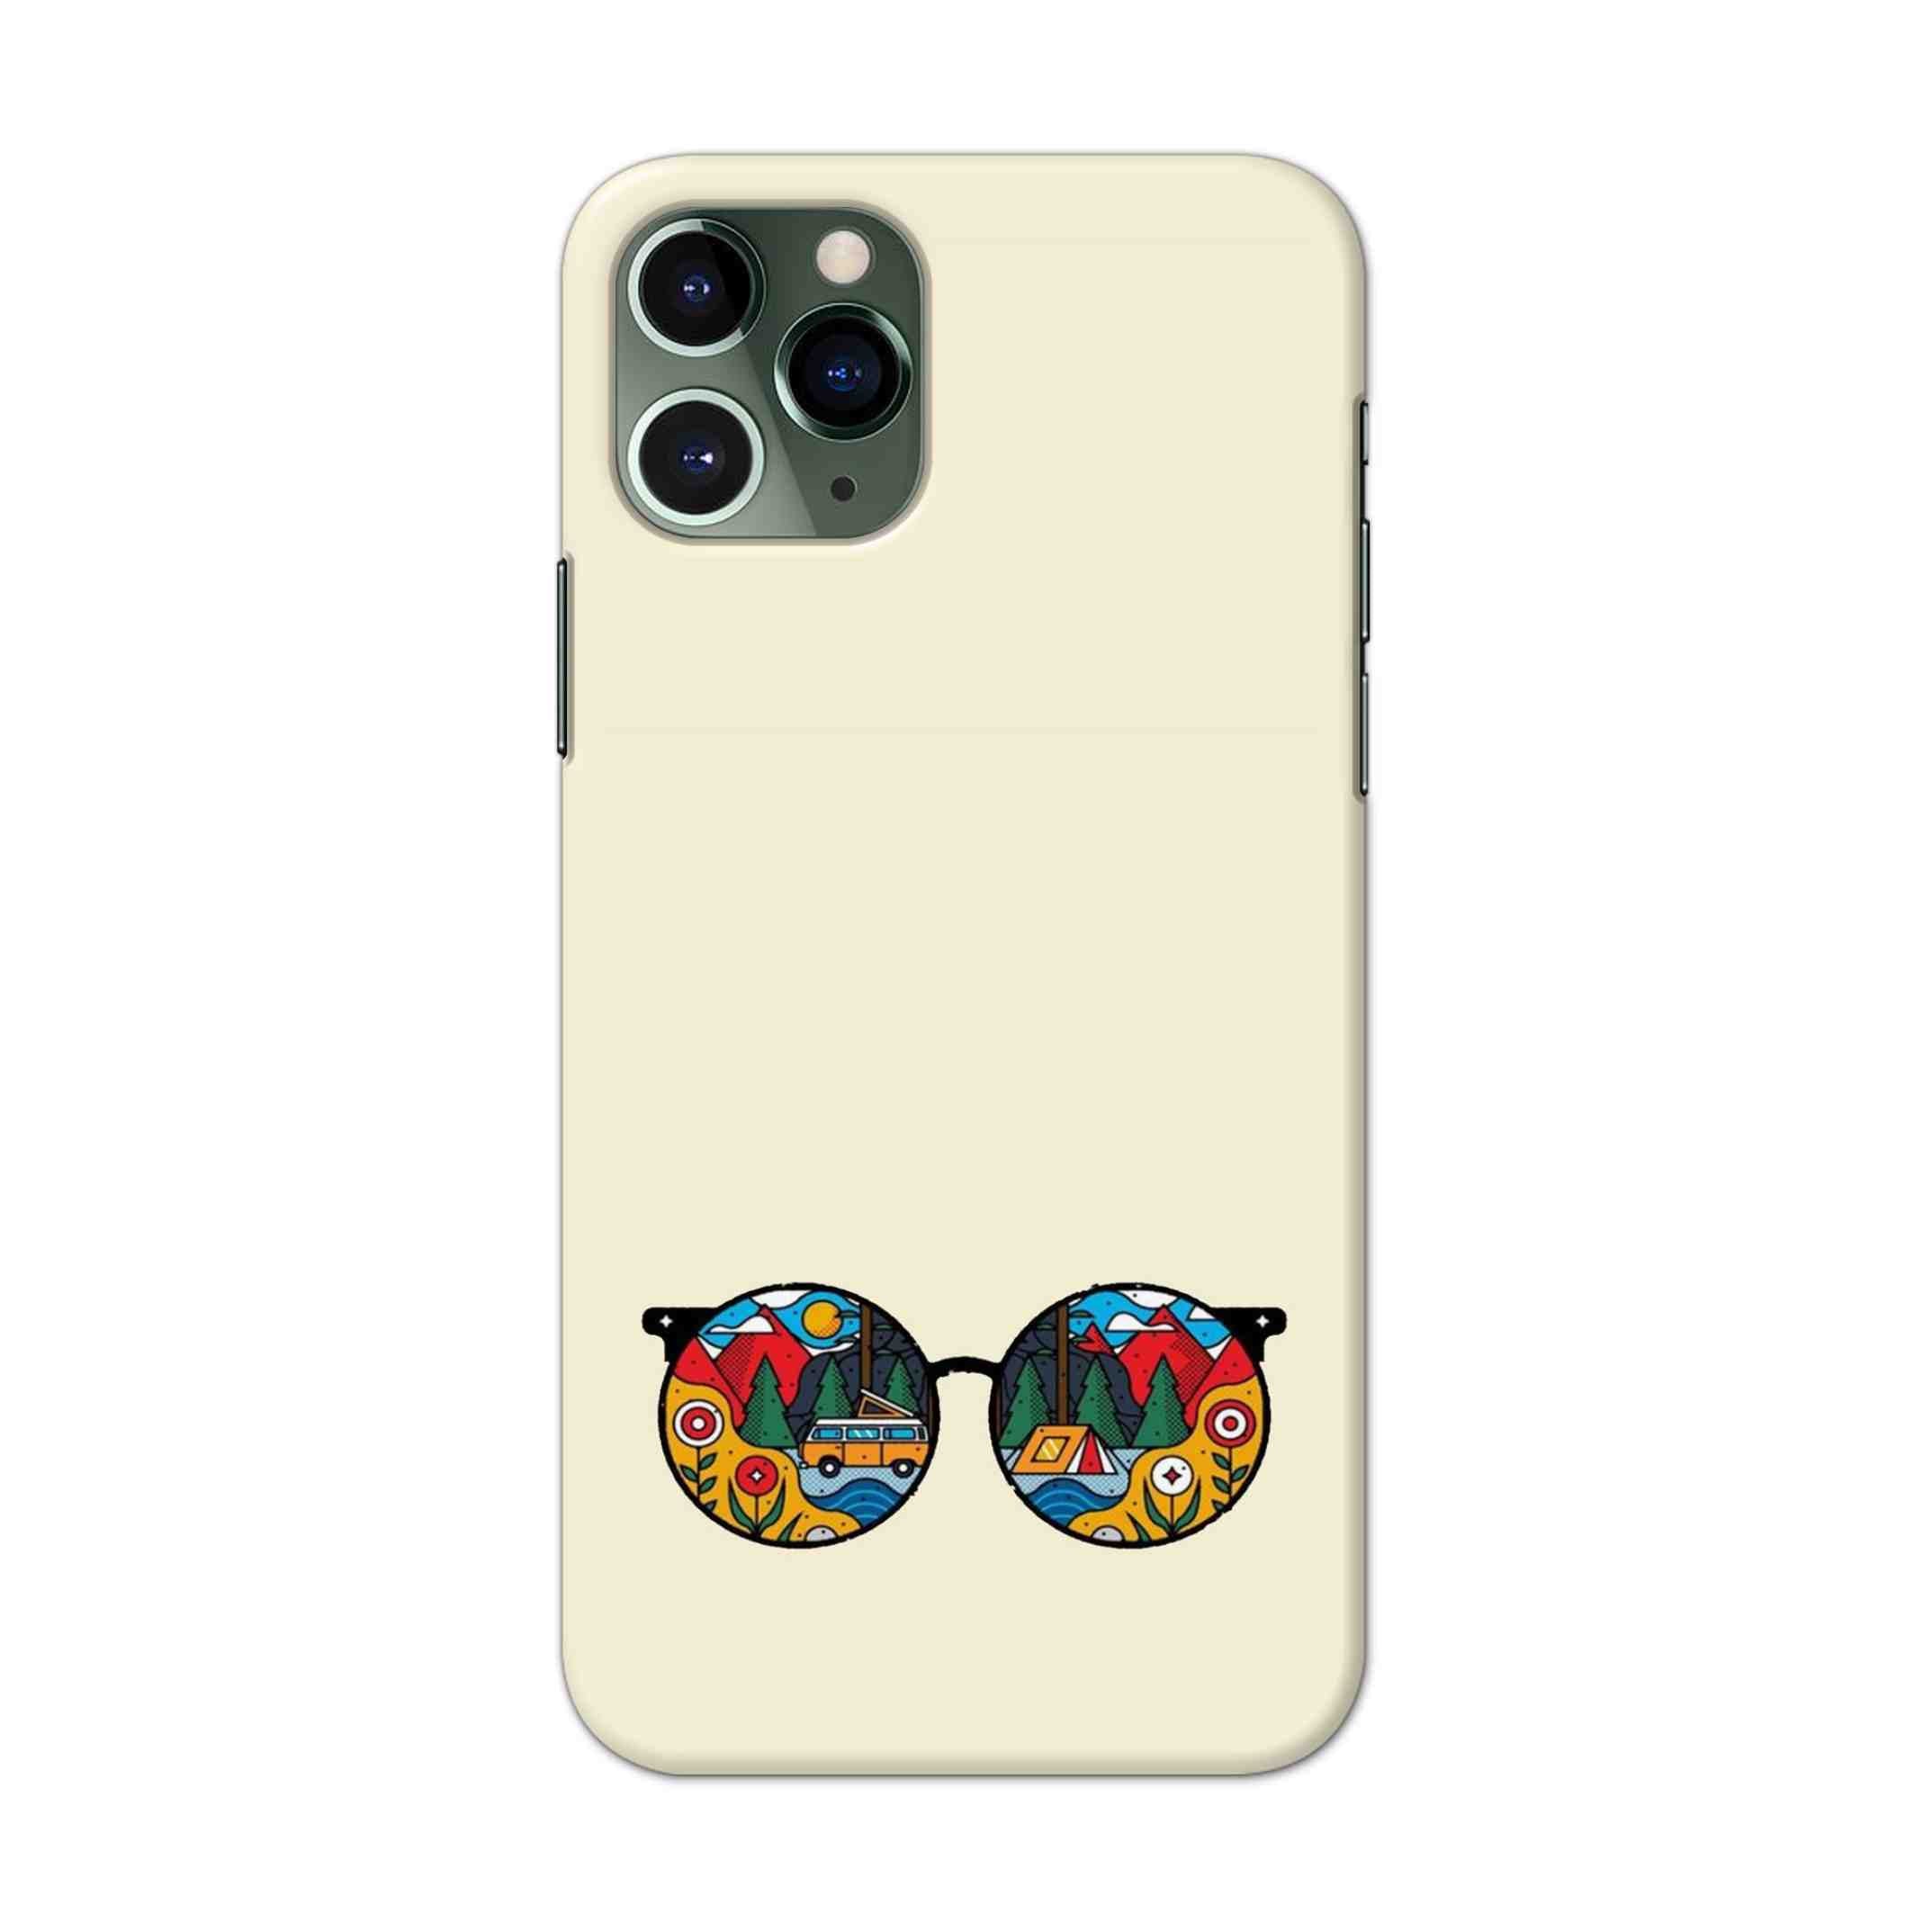 Buy Rainbow Sunglasses Hard Back Mobile Phone Case/Cover For iPhone 11 Pro Online